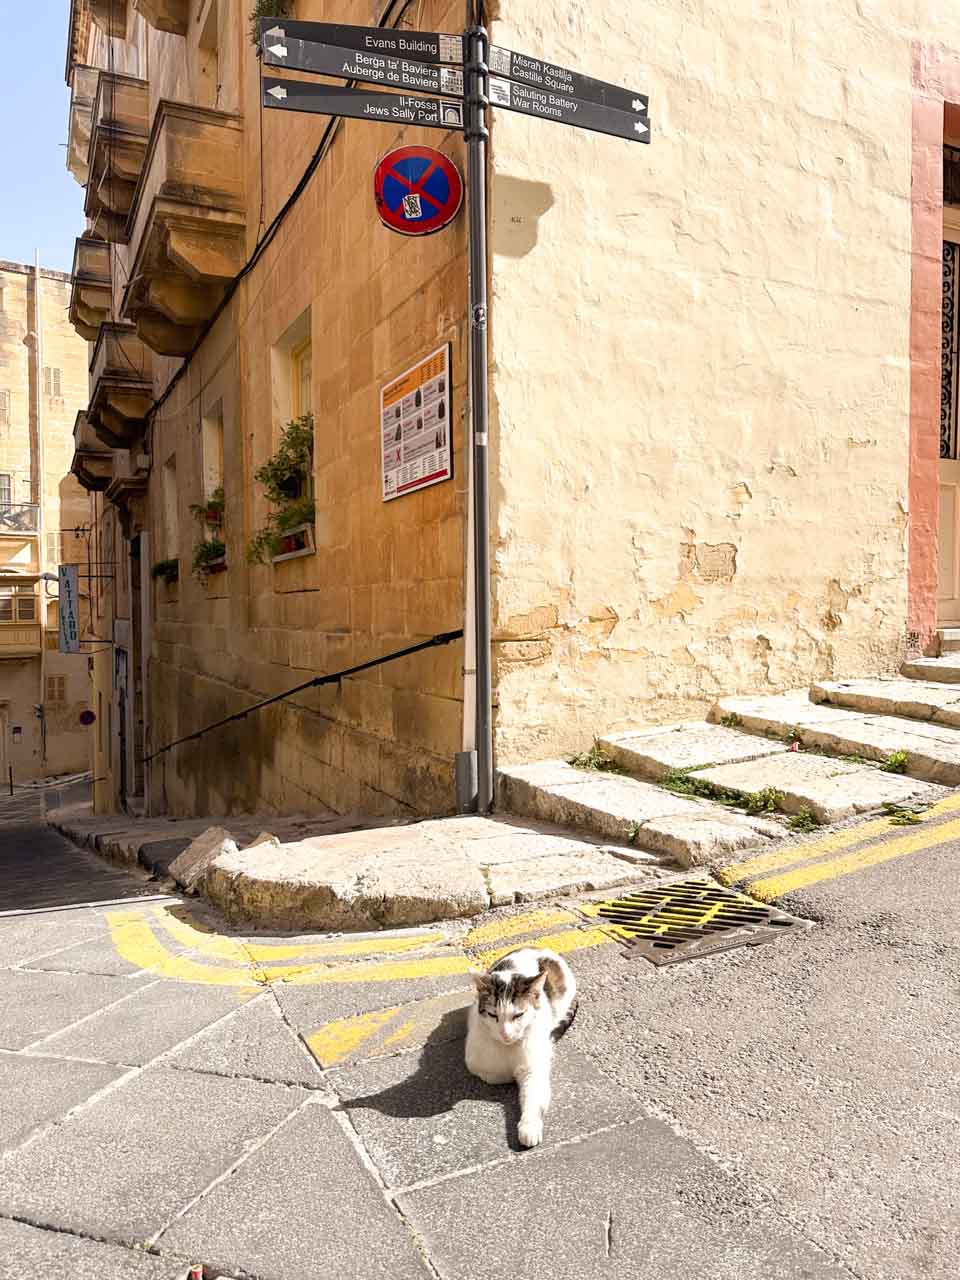 A cat lying in the middle of the street in Valletta, Malta